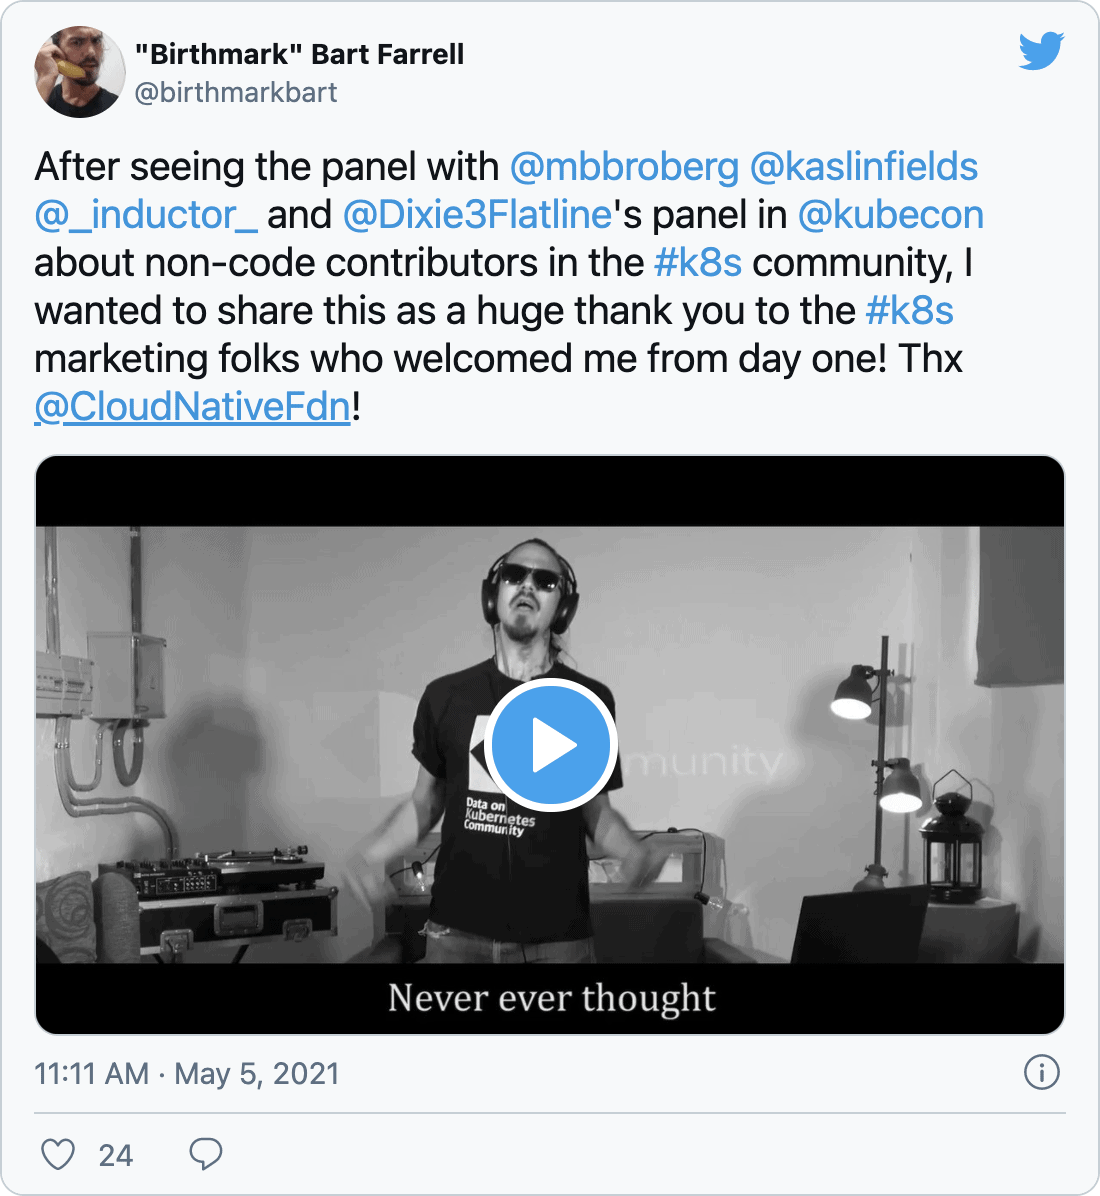 @birthmarkbart on Twitter: After seeing the panel with @mbbroberg @kaslinfields @inductor and @Dixie3Flatline&rsquo;s panel in @kubecon about non-code contributors in the #k8s community, I wanted to share this as a huge thank you to the #k8s marketing folks who welcomed me from day one! Thx @CloudNativeFdn!